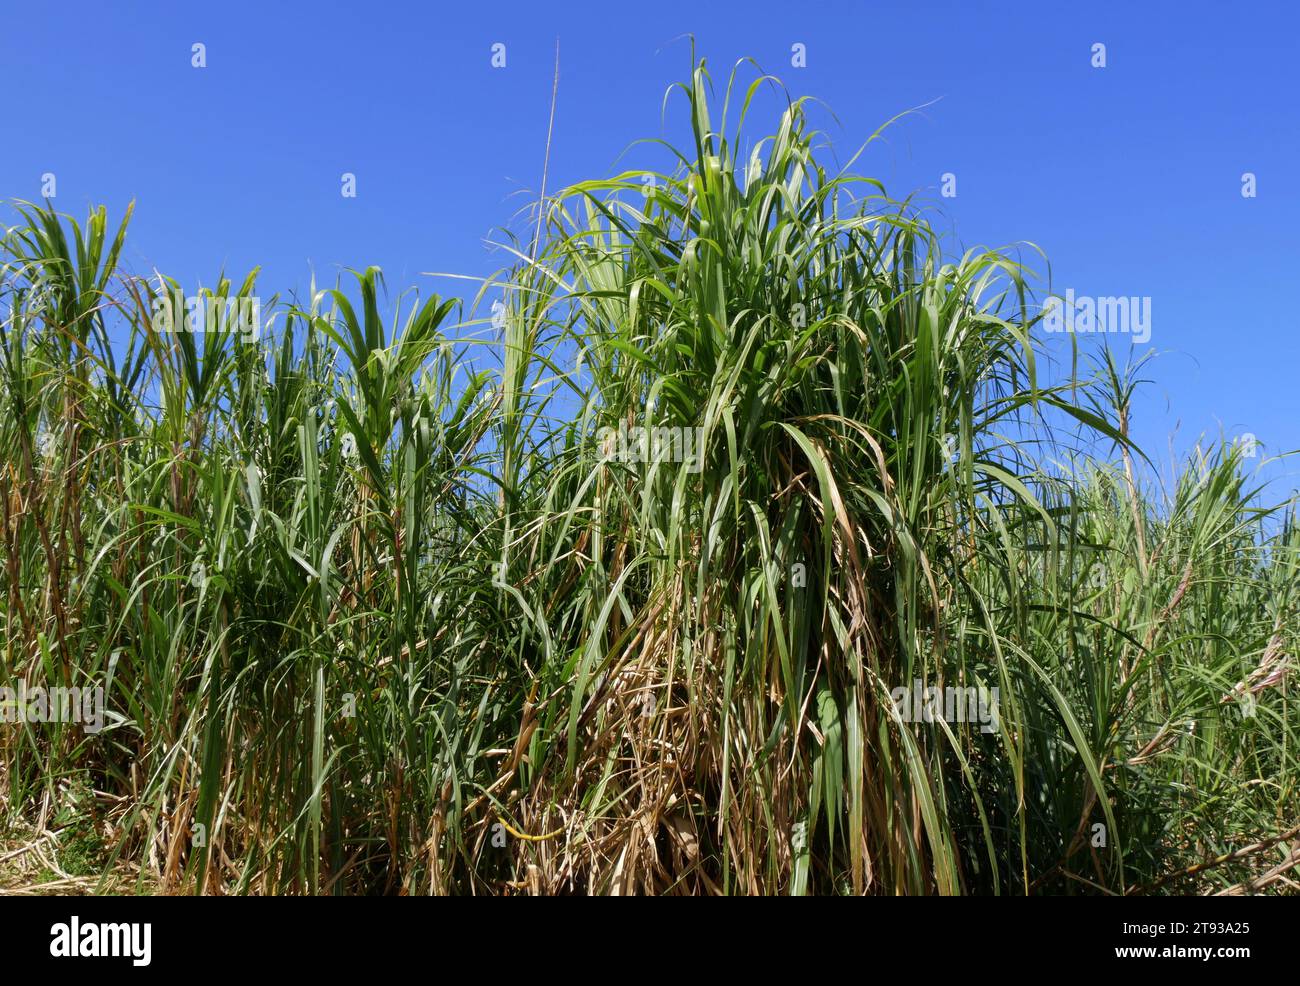 Field of sugarcanes in Reunion island, tropical plantation of saccharum officinarum grass canopy Stock Photo